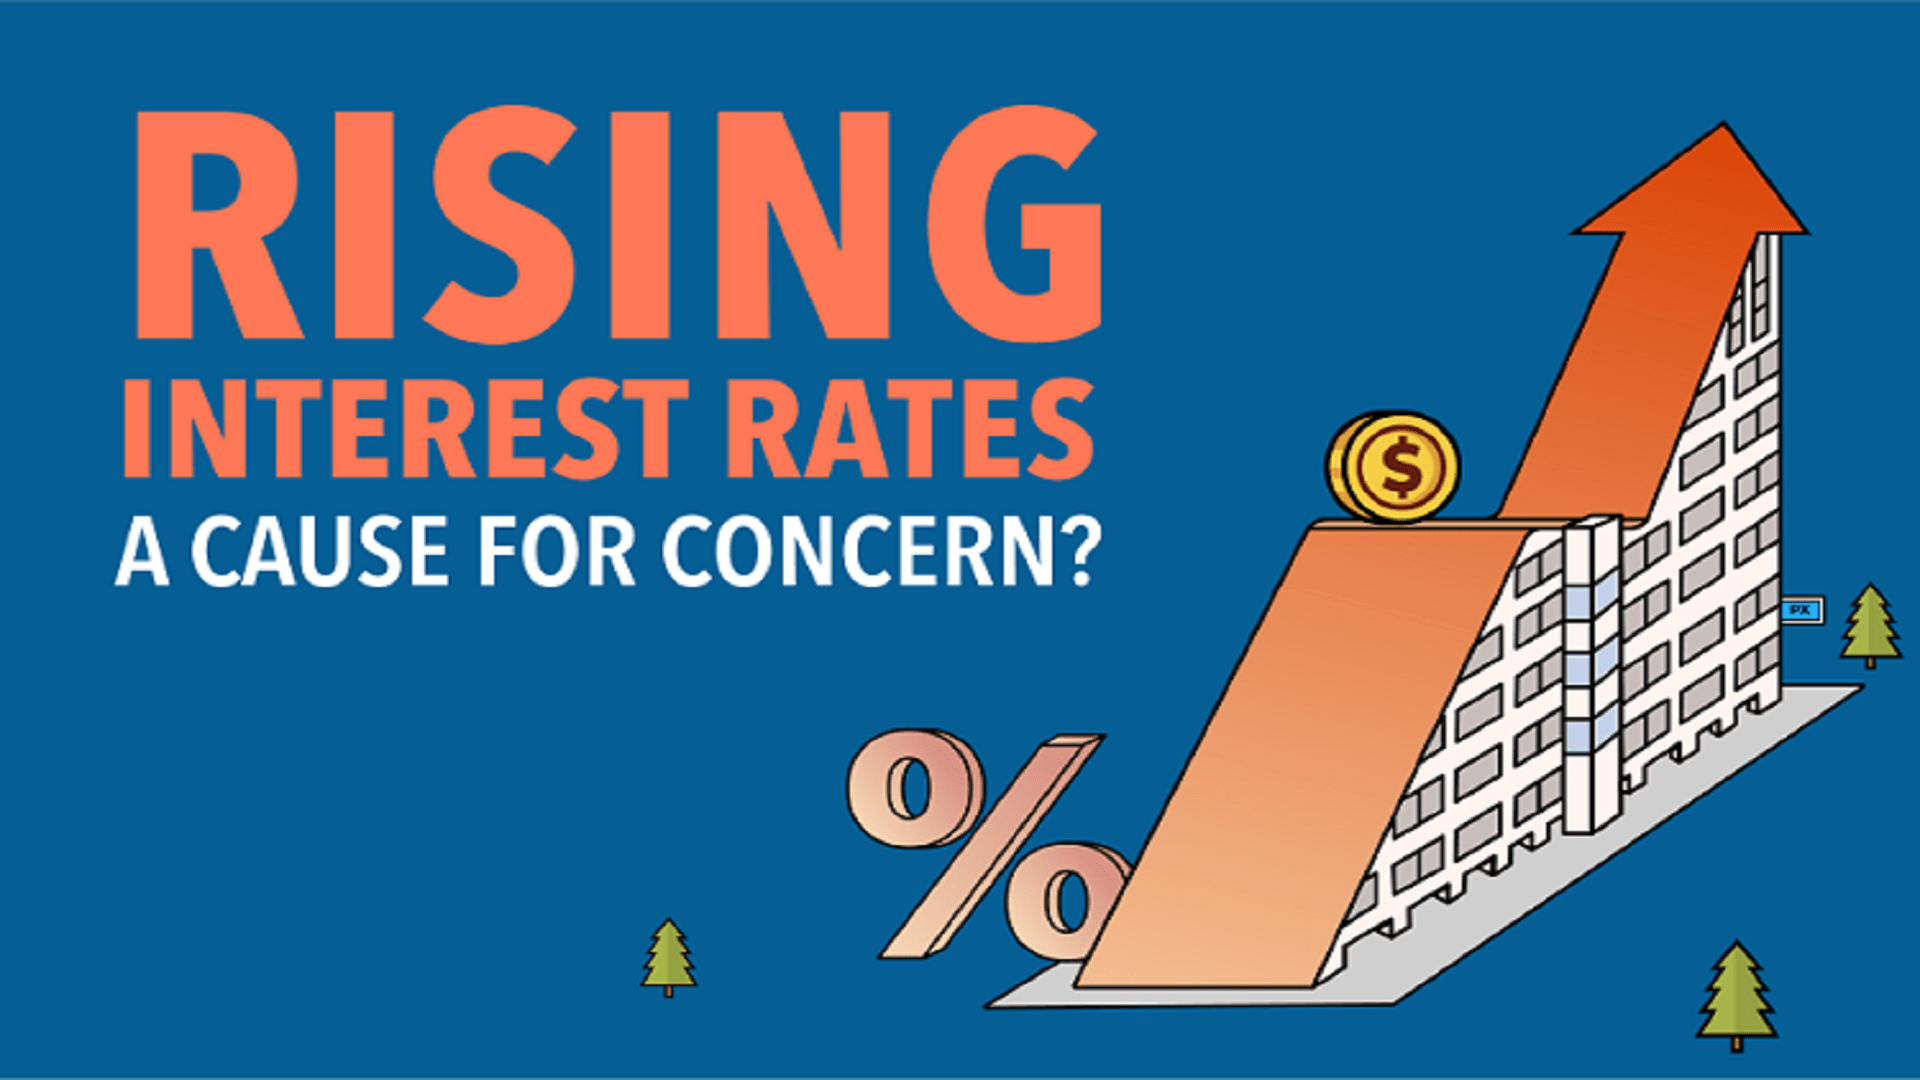 How does a rising interest rate impact you?